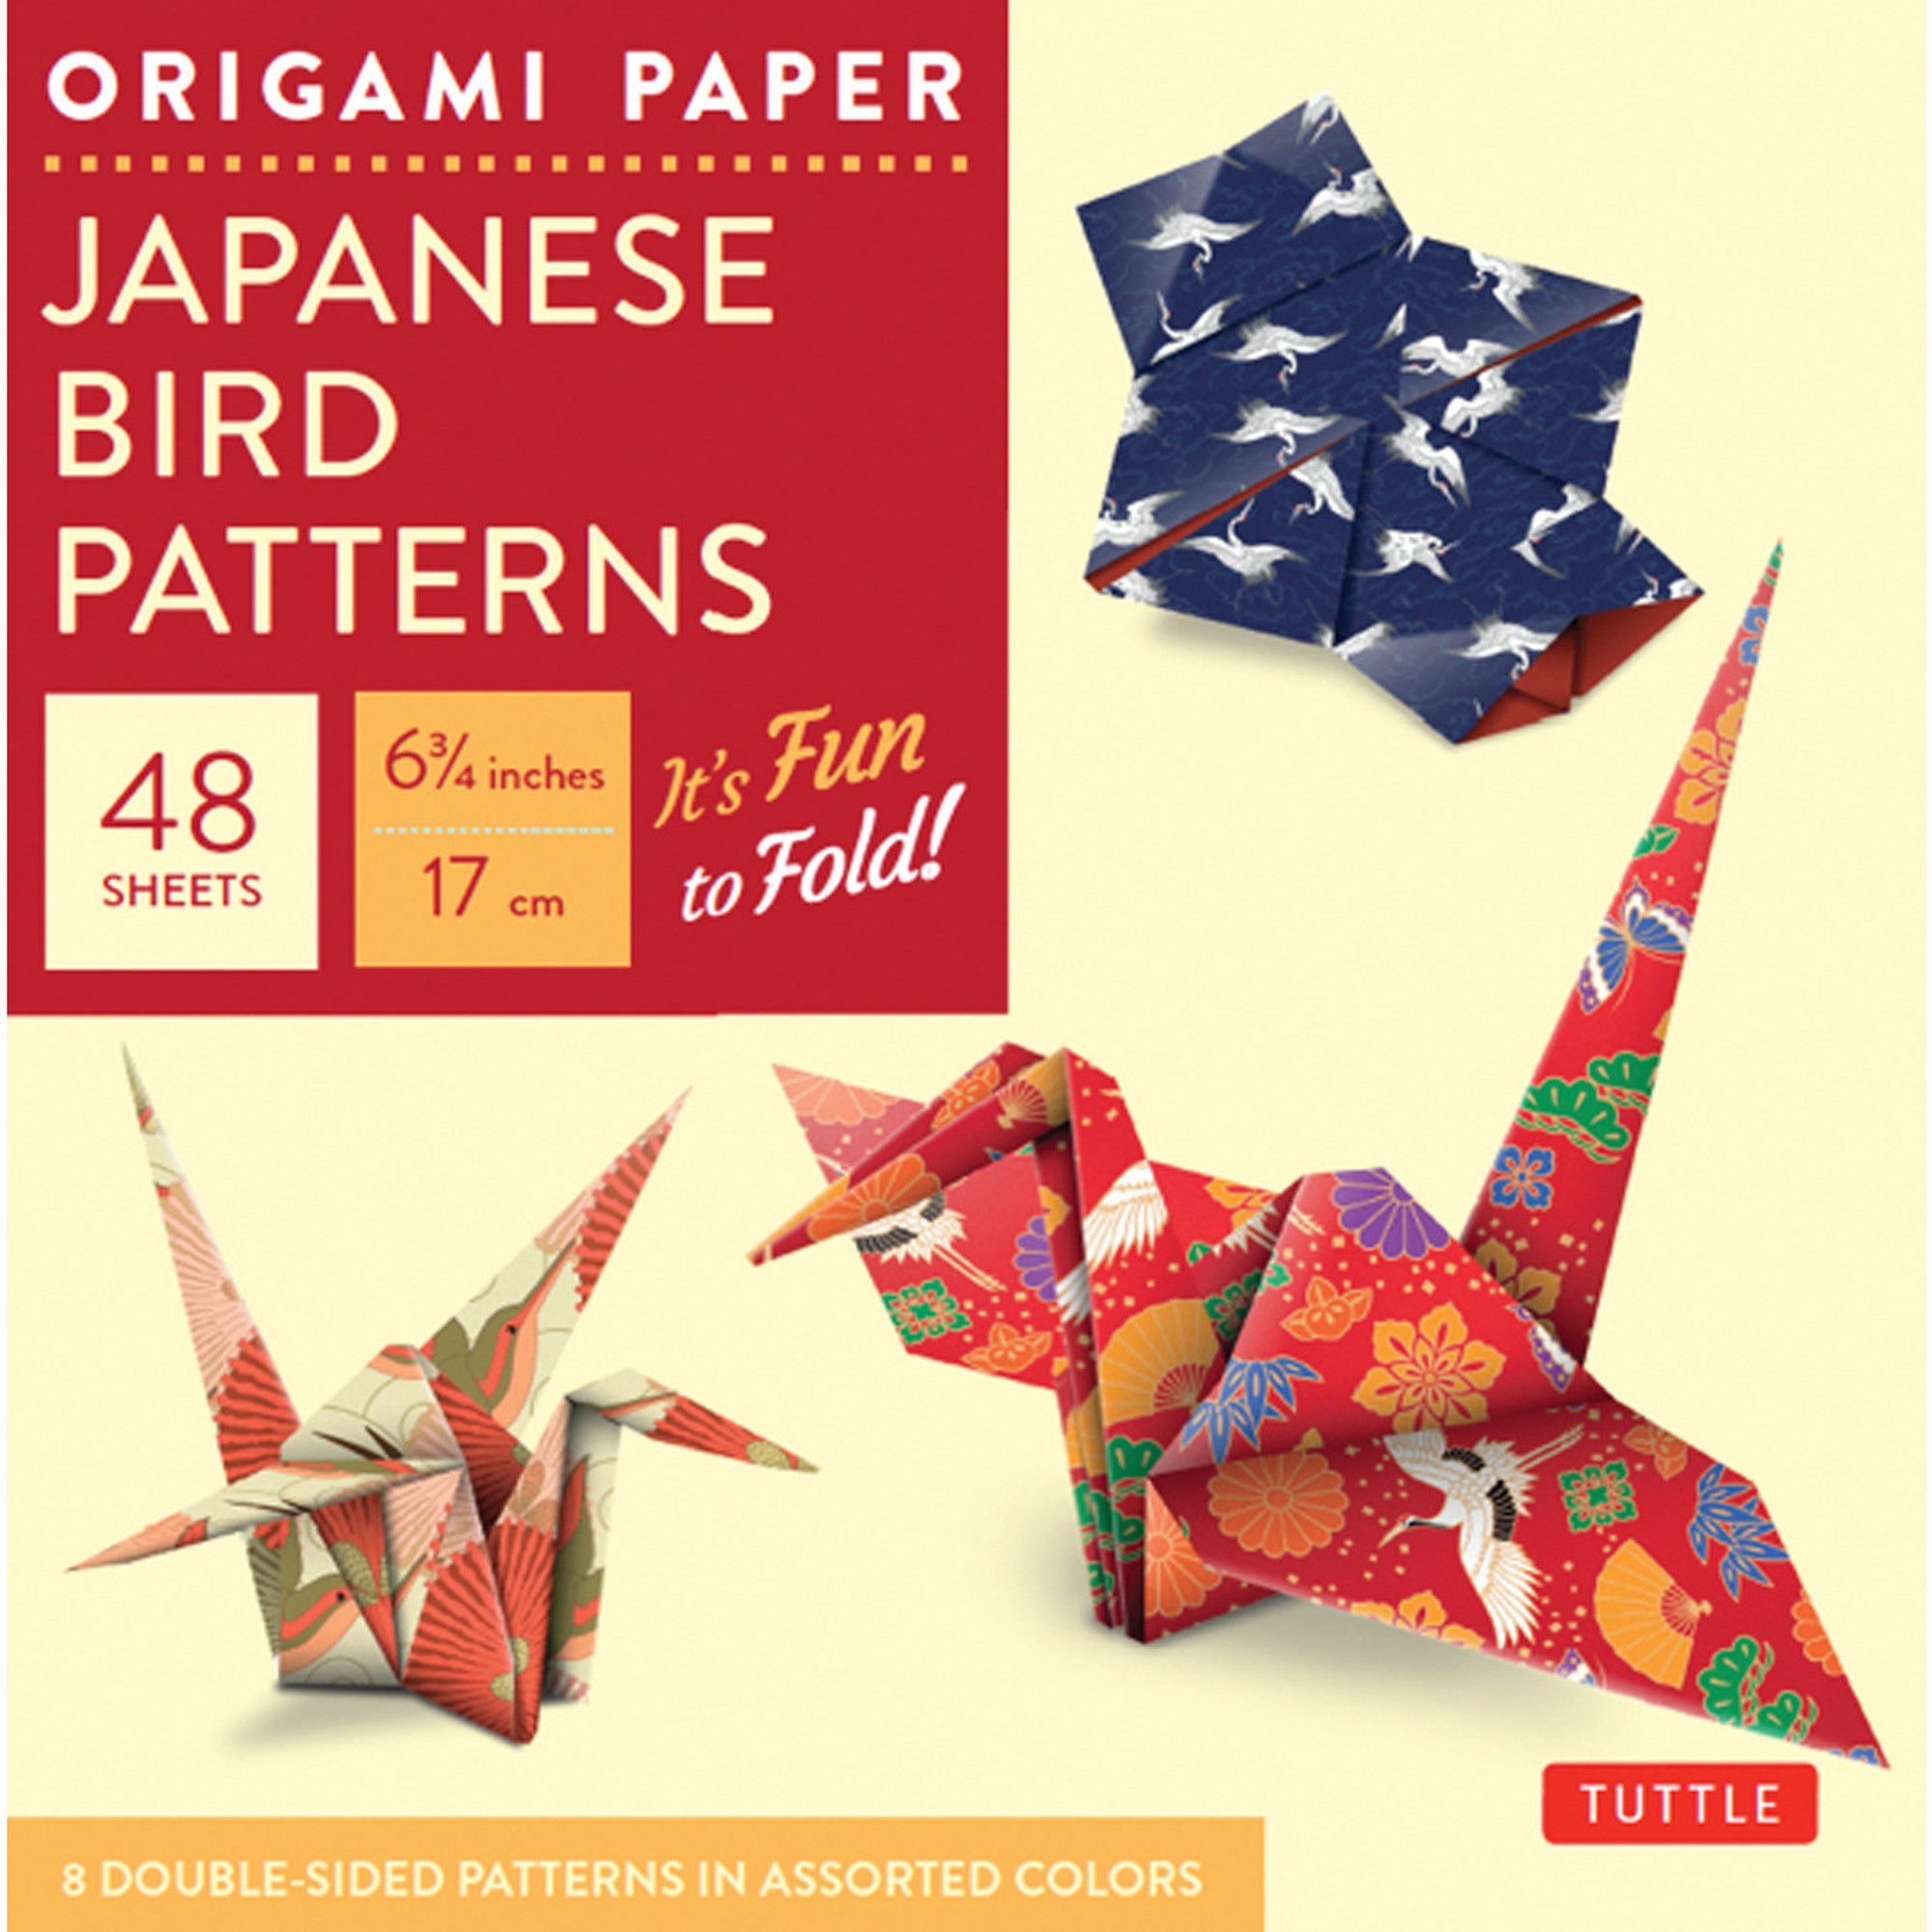 Origami Paper - Japanese Bird Patterns - 6 3/4 - 48 Sheets (9780804844888)